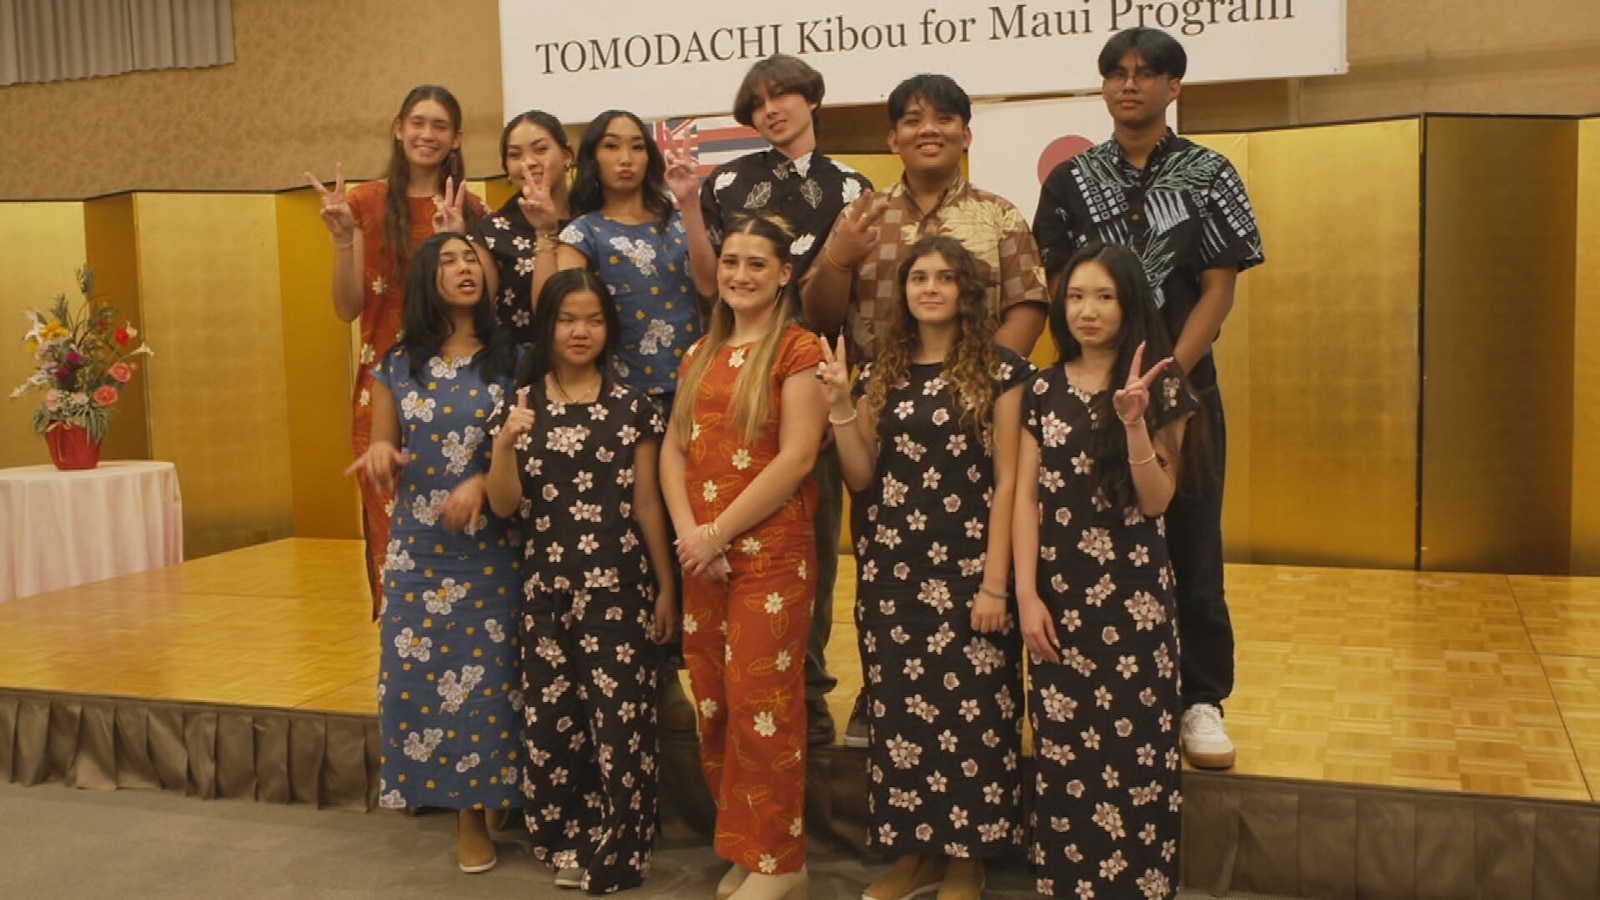 Hawaii-Japan exchange program offers Maui students hope after wildfires [Video]